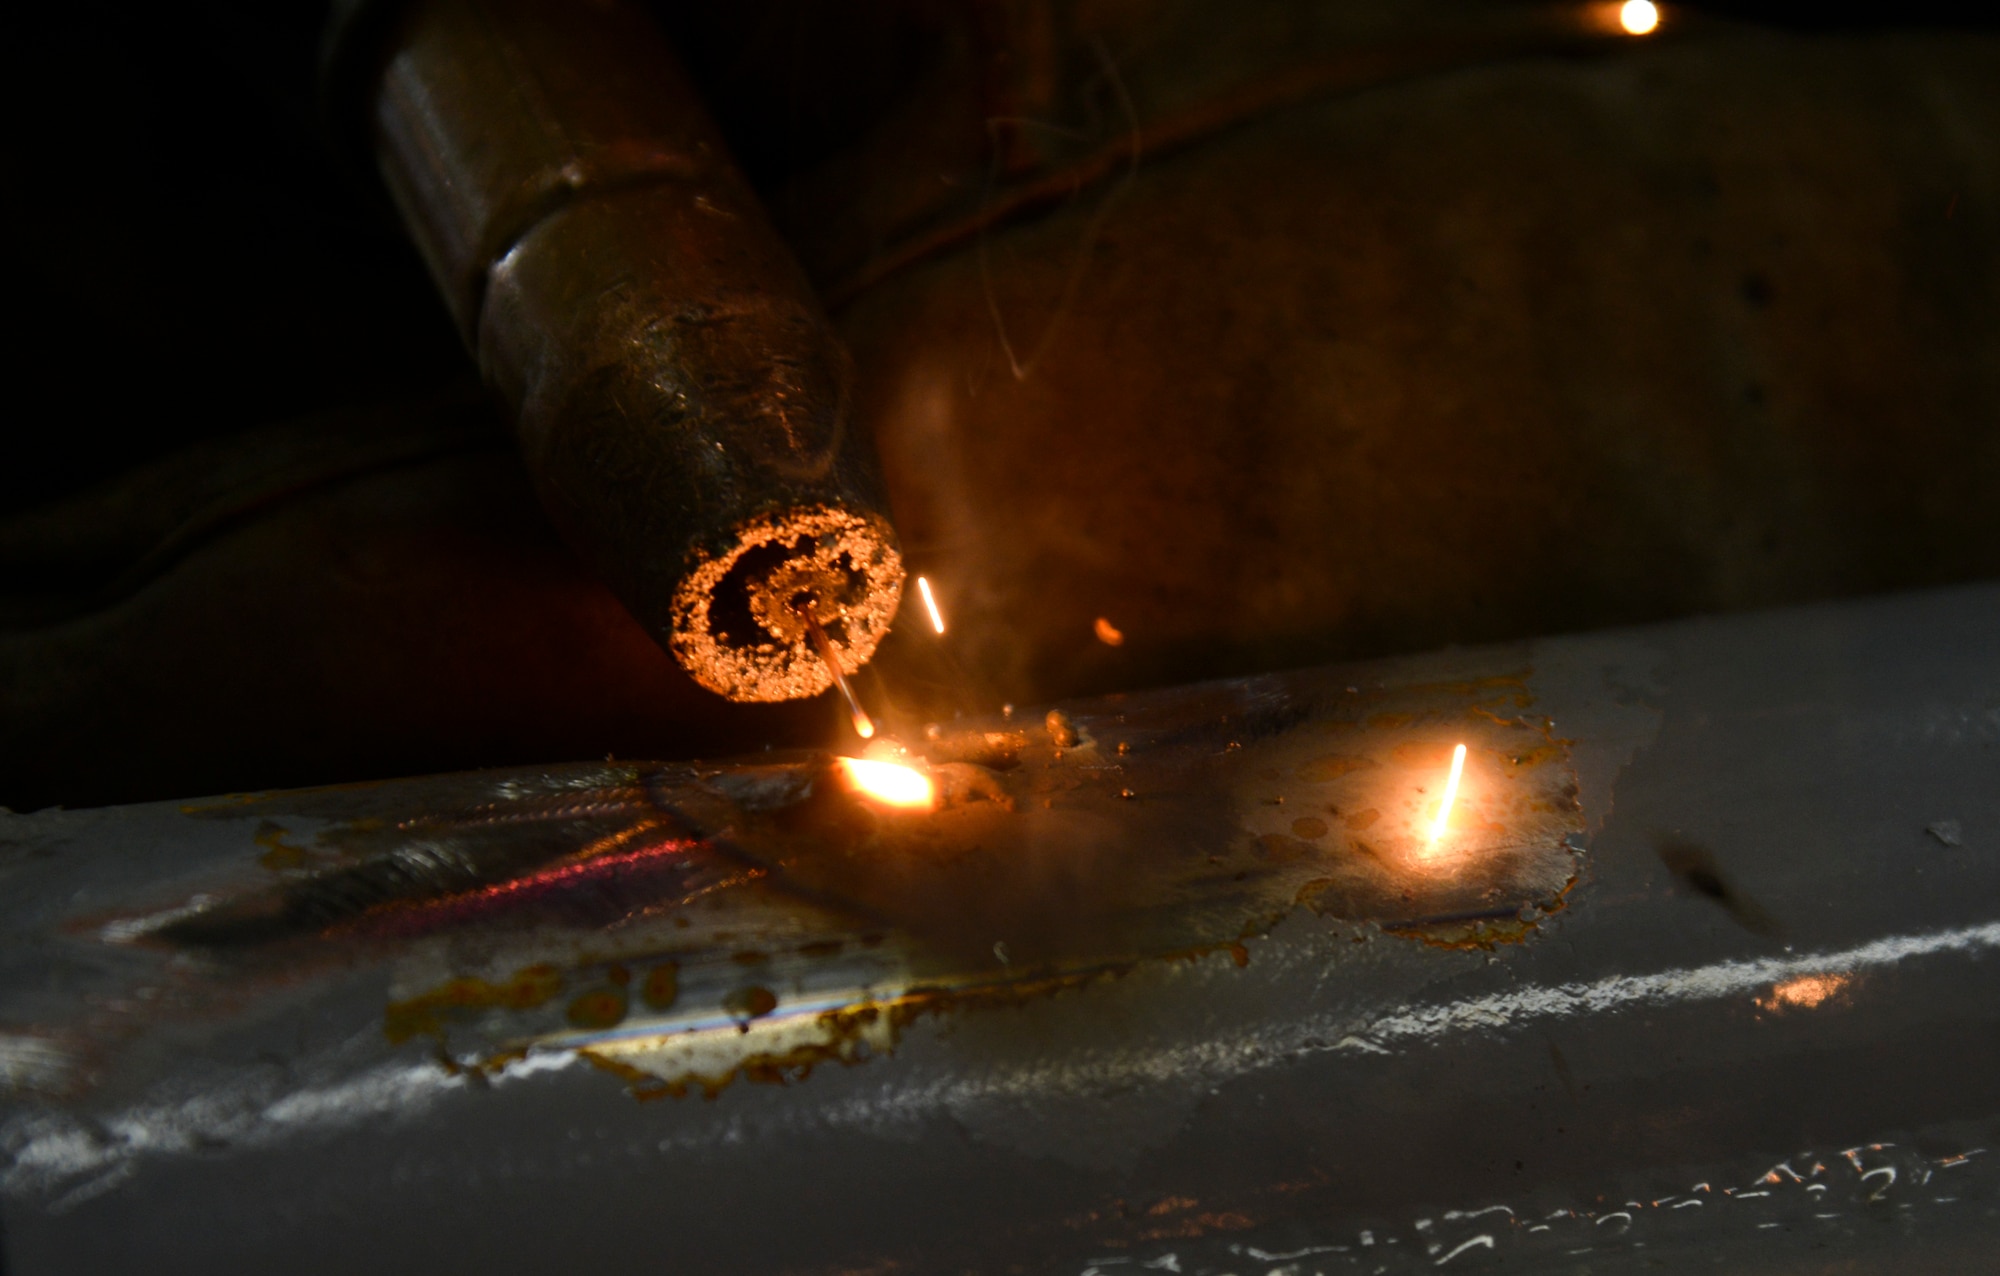 Airman 1st Class Curtis Doherty, a 374th Maintenance Squadron aircraft metals technology journeyman, welds a post hole for a B-1B Lancer platform in the fabrication shop at Yokota Air Base, Japan, June 23, 2015. The metal technology shop works on 20-80 pieces of equipment each week. (U.S. Air Force photo/Senior Airman David Owsianka)